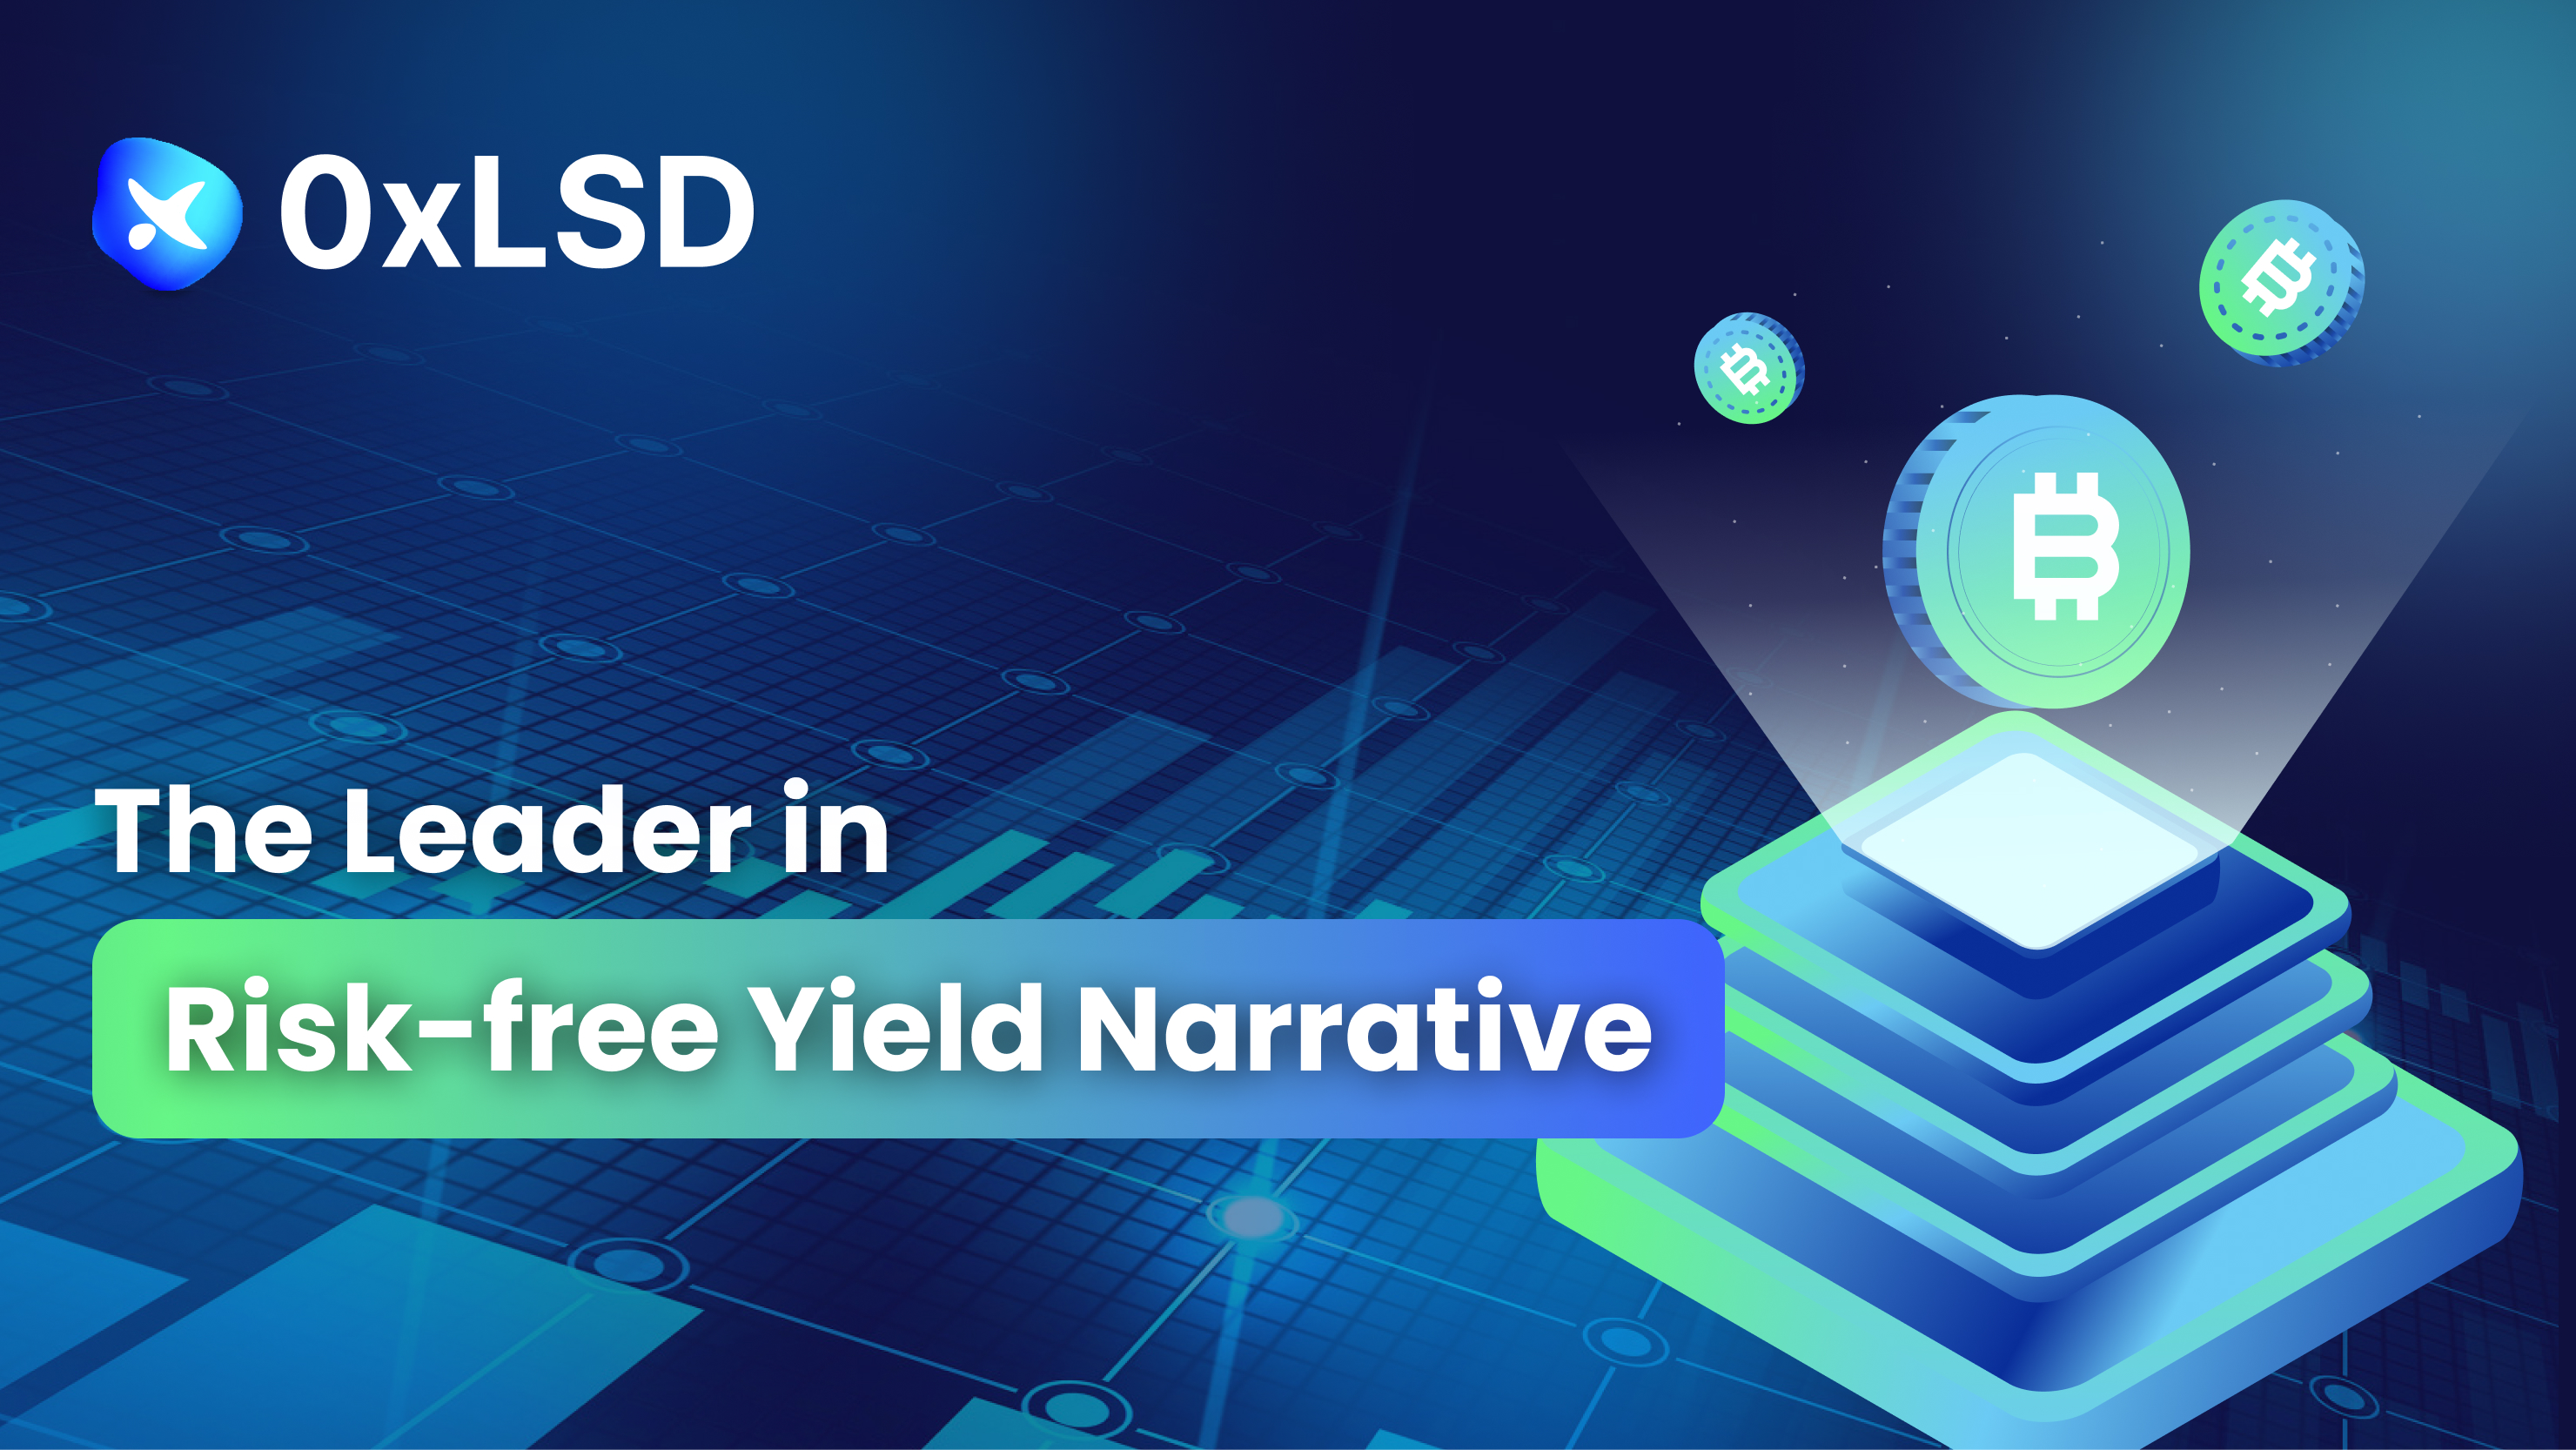 0xLSD, the leader in risk-free yield narrative during bear markets